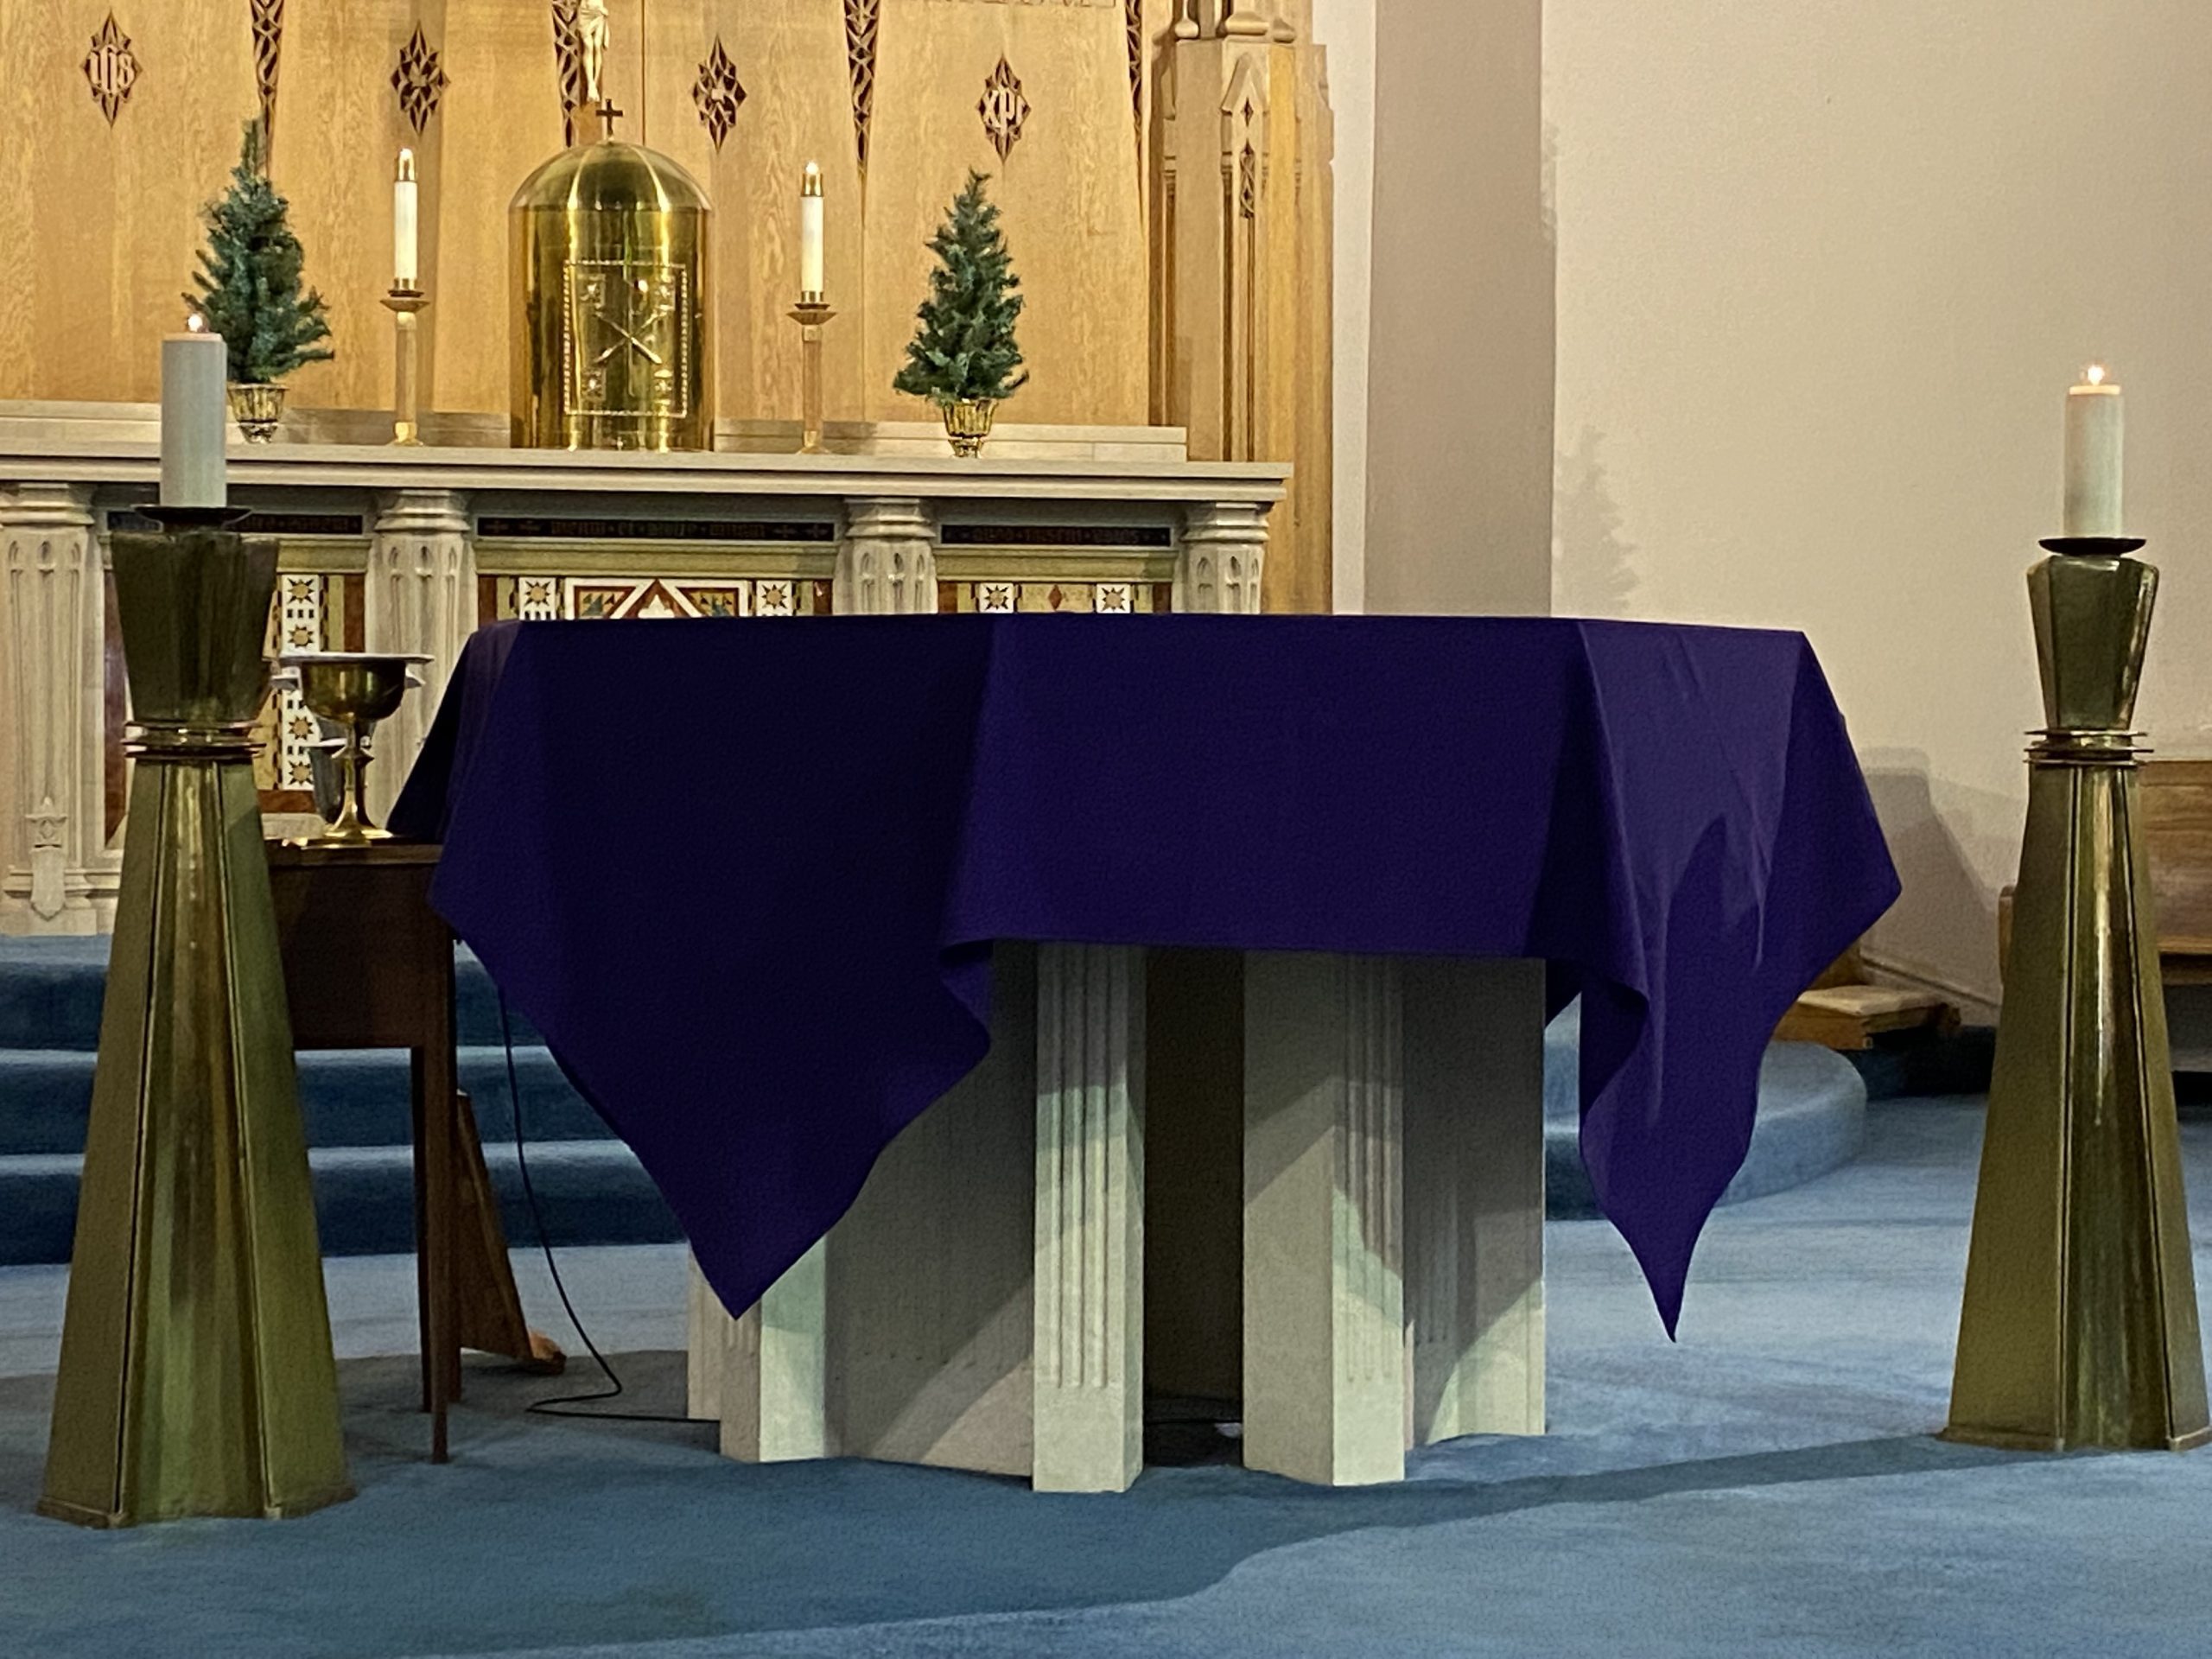 Photo of the Altar at Immaculate Conception Church, Ithaca NY December 5 2021